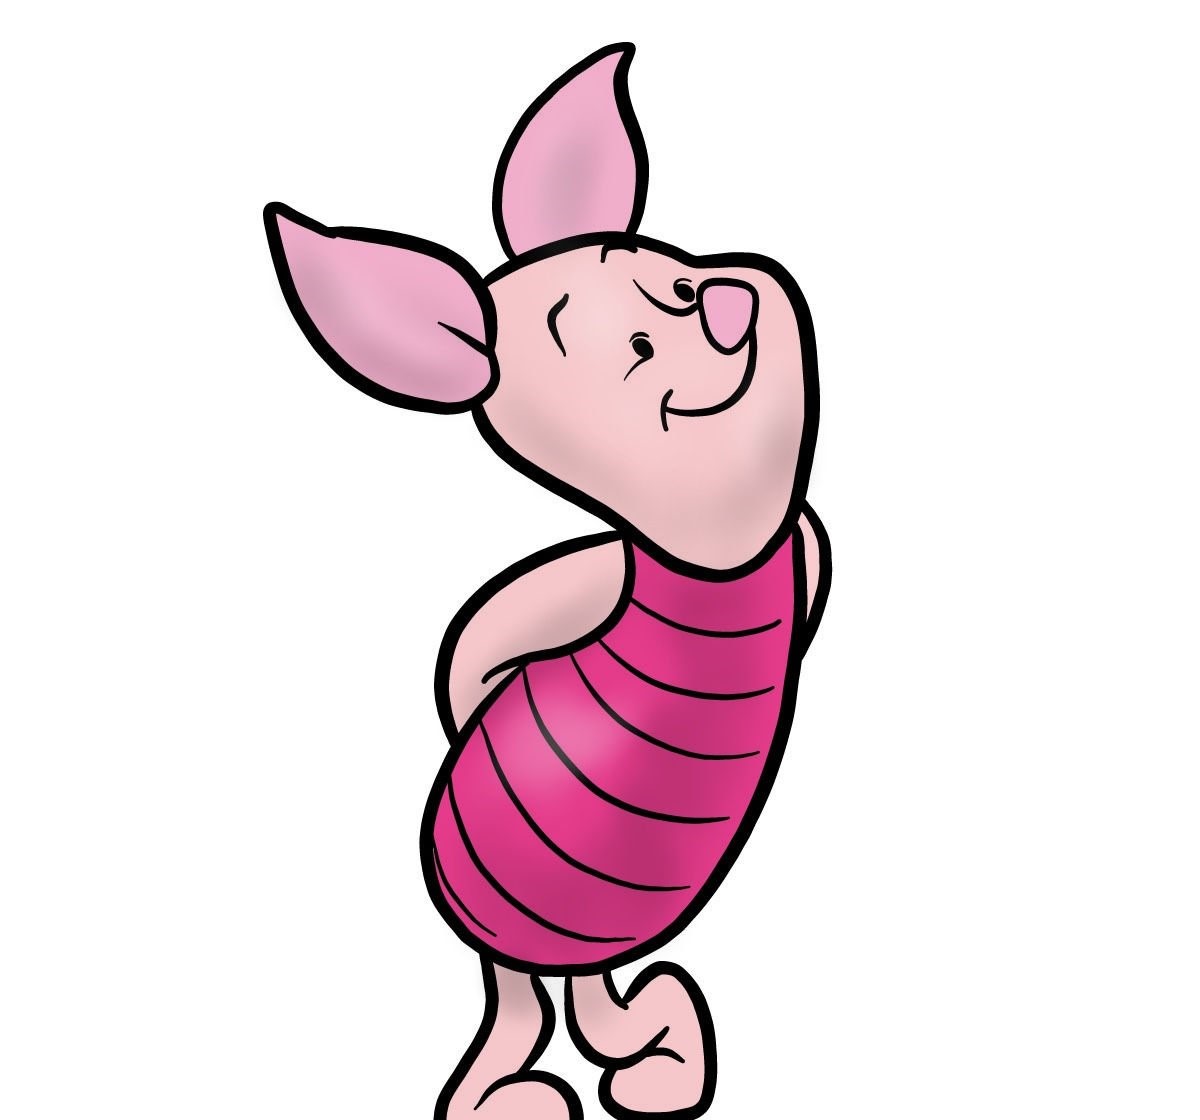 23-facts-about-piglet-winnie-the-pooh